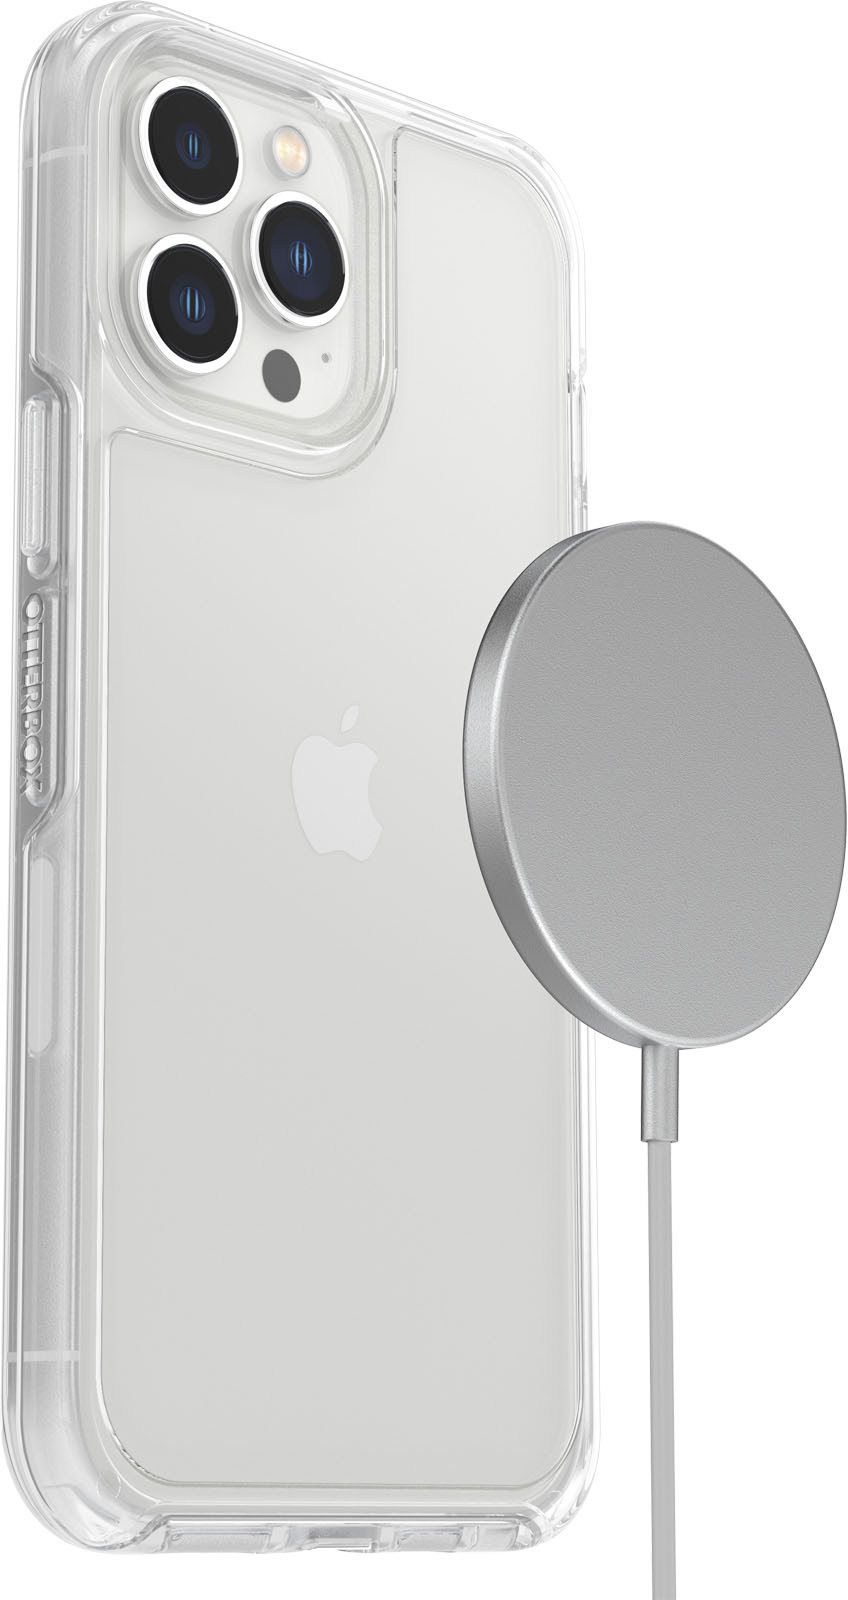 Left View: OtterBox - Symmetry Series Soft Shell for Apple iPhone 13 Pro Max and iPhone 12 Pro Max - Clear